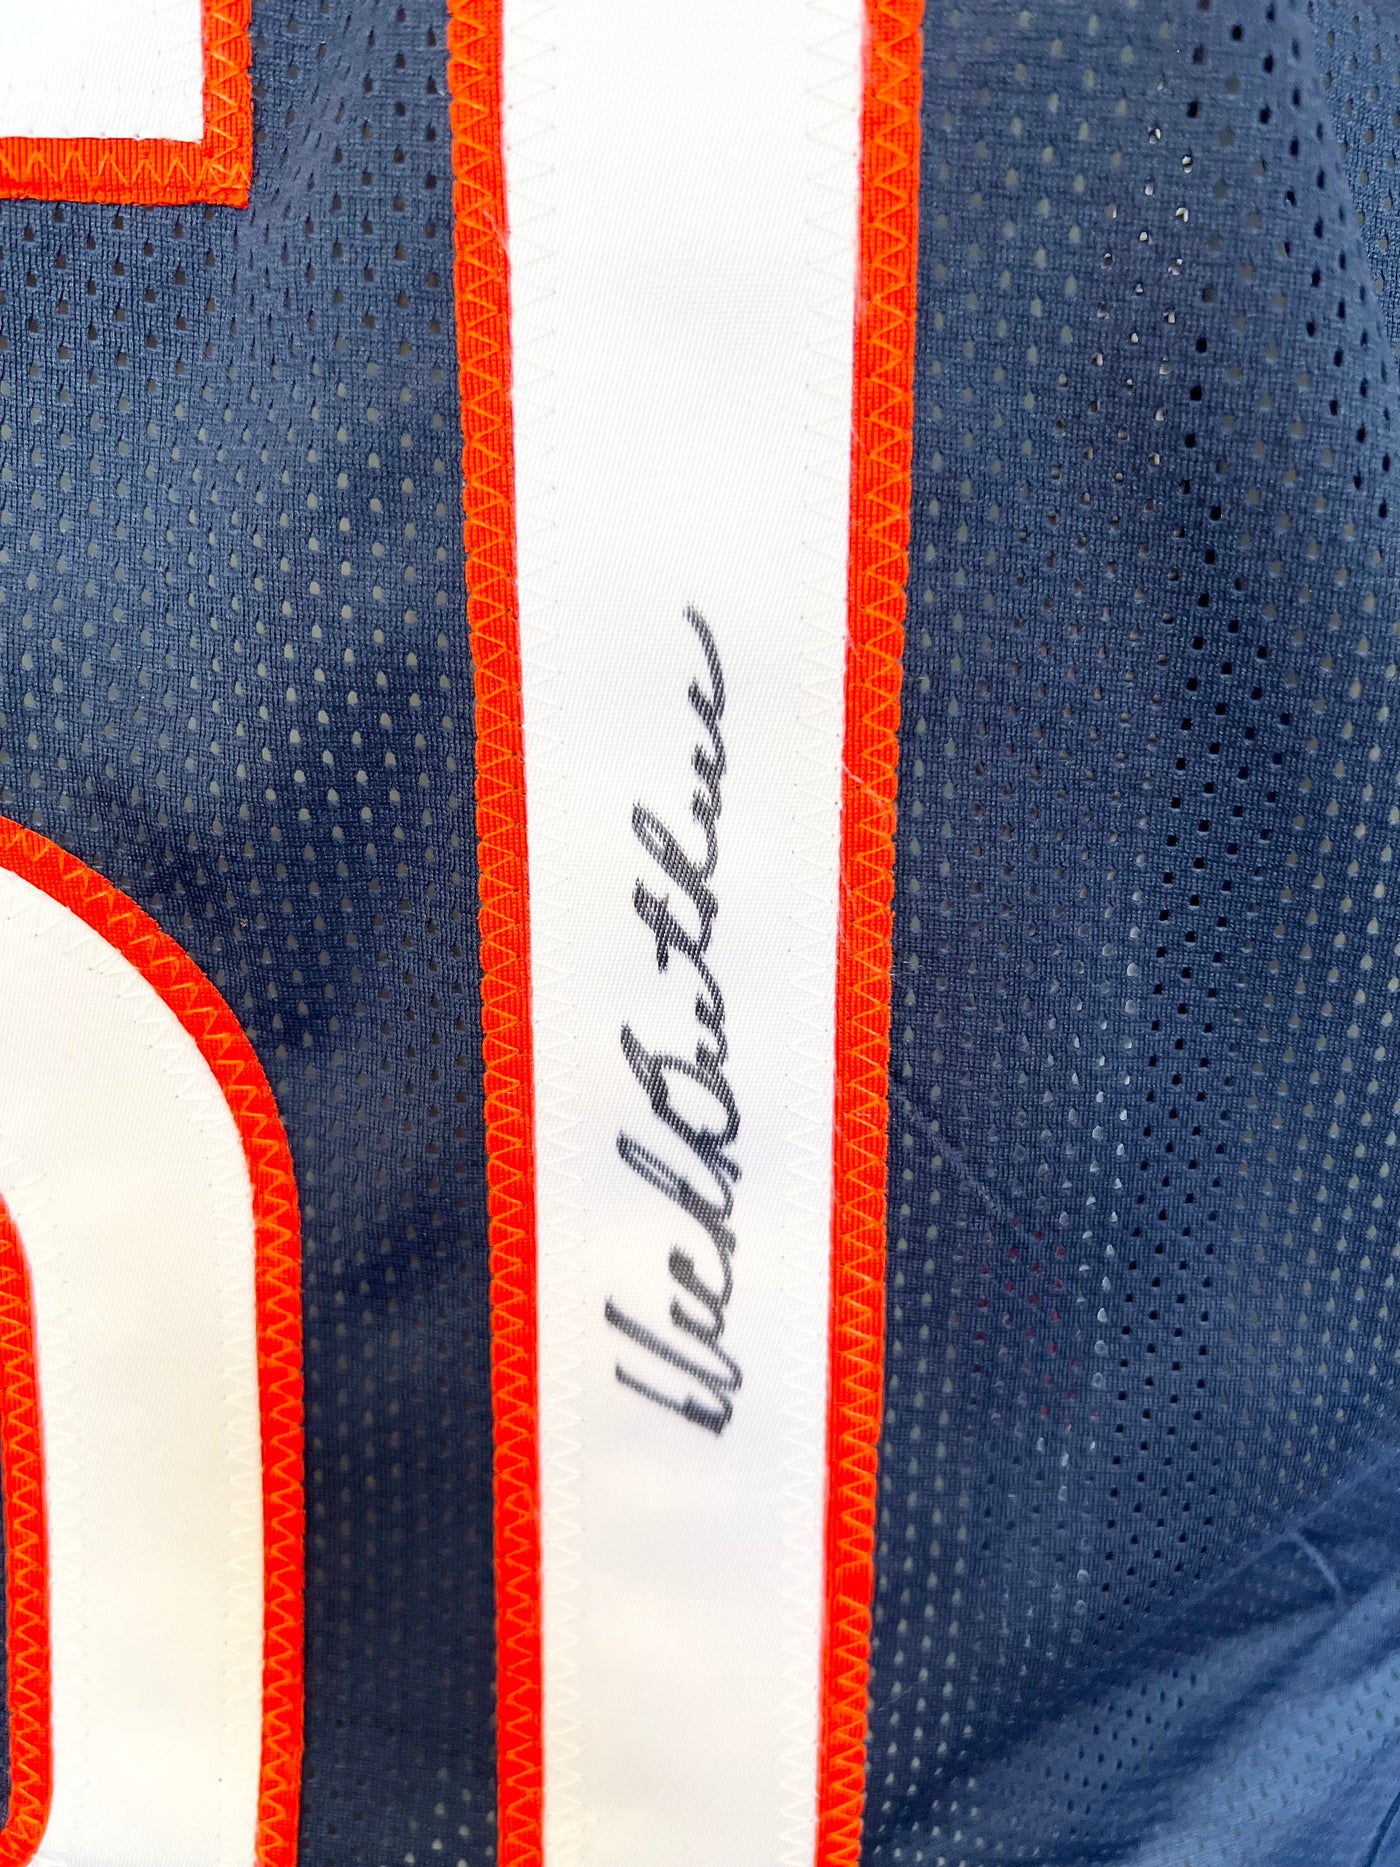 Dick Butkus Signed Jersey Beckett Authentication